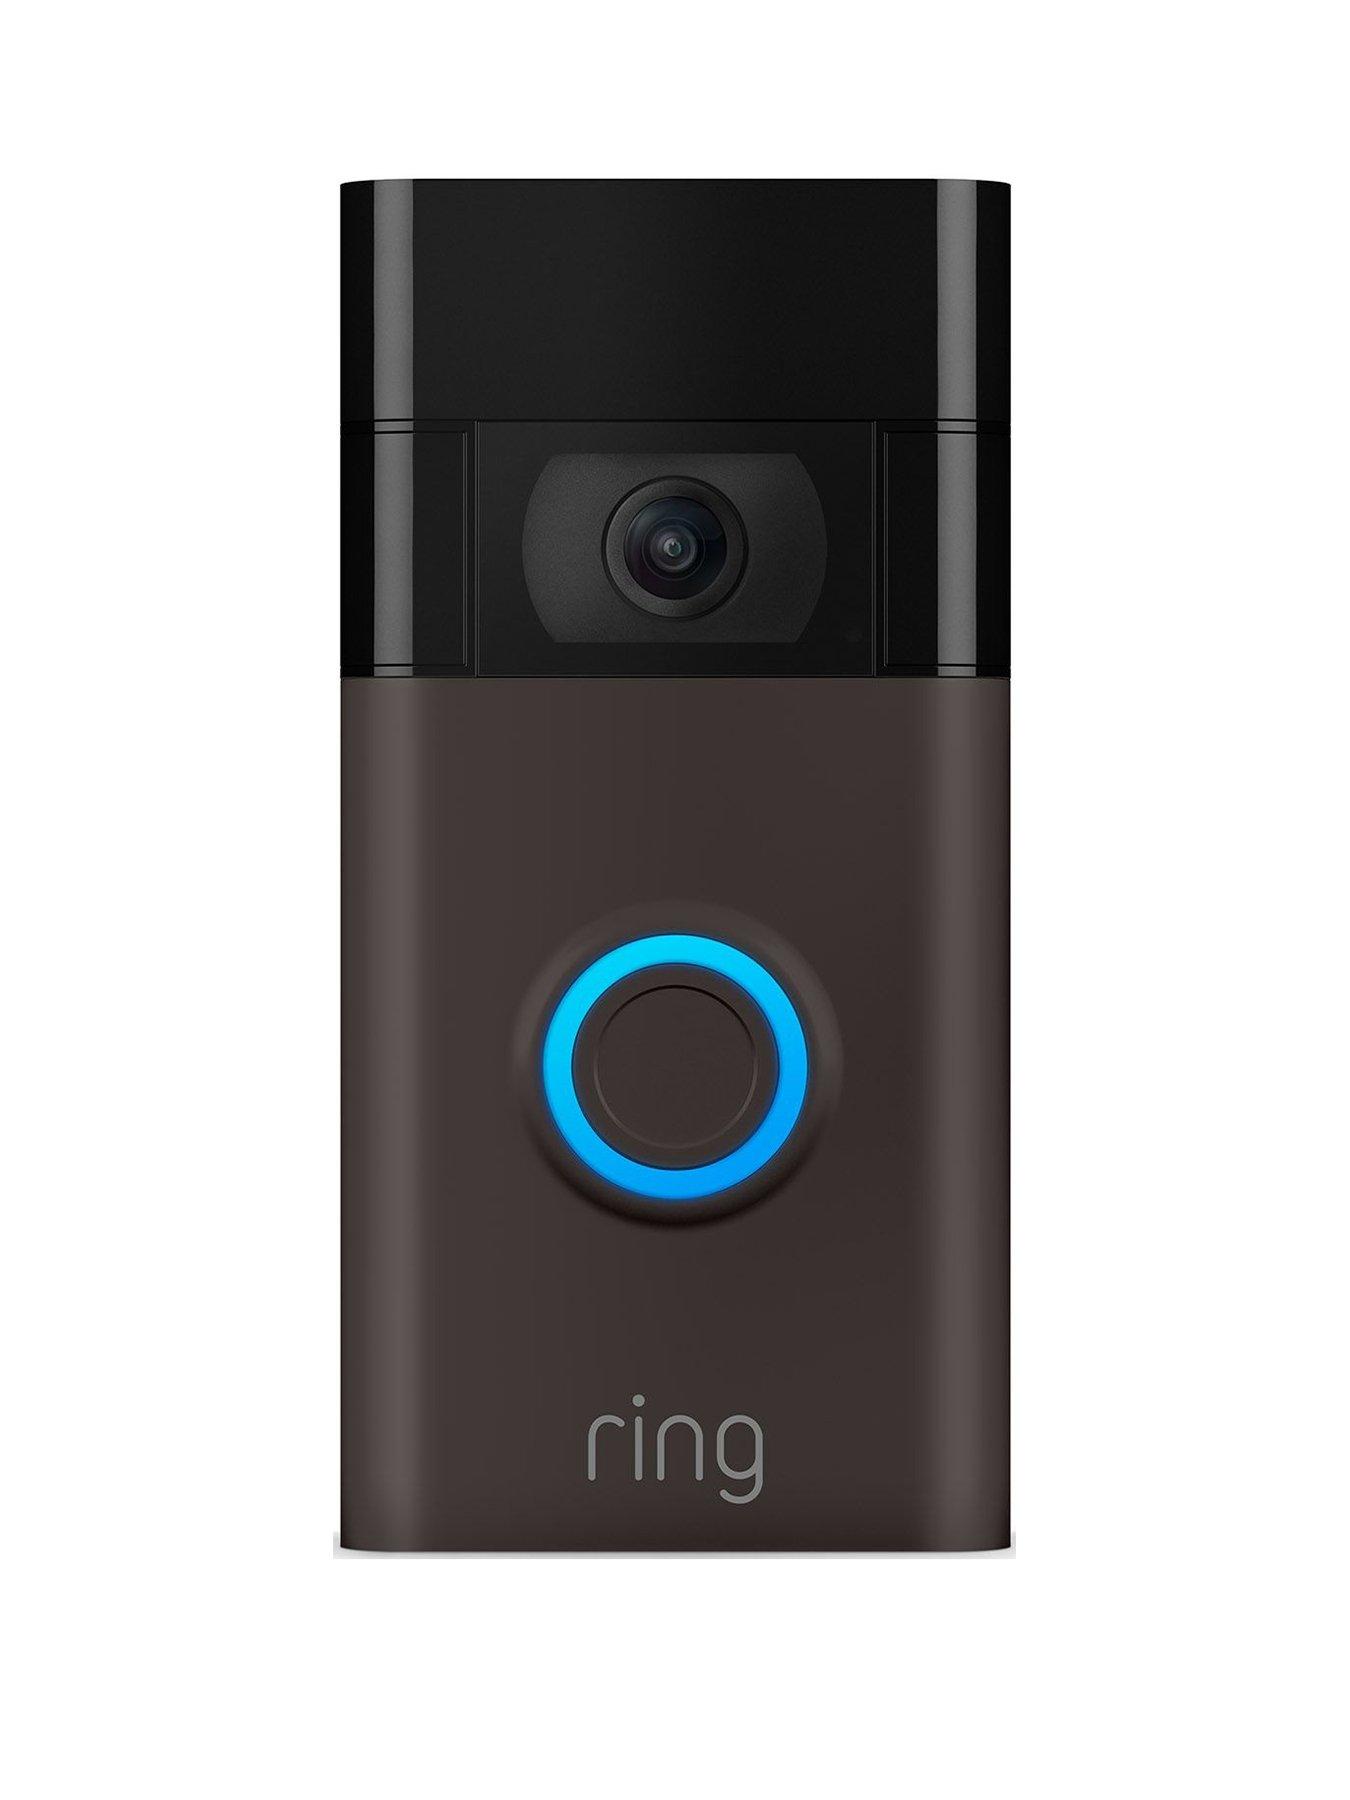 Amazon's Ring Introduces Security Camera Drone, The Always Home Cam